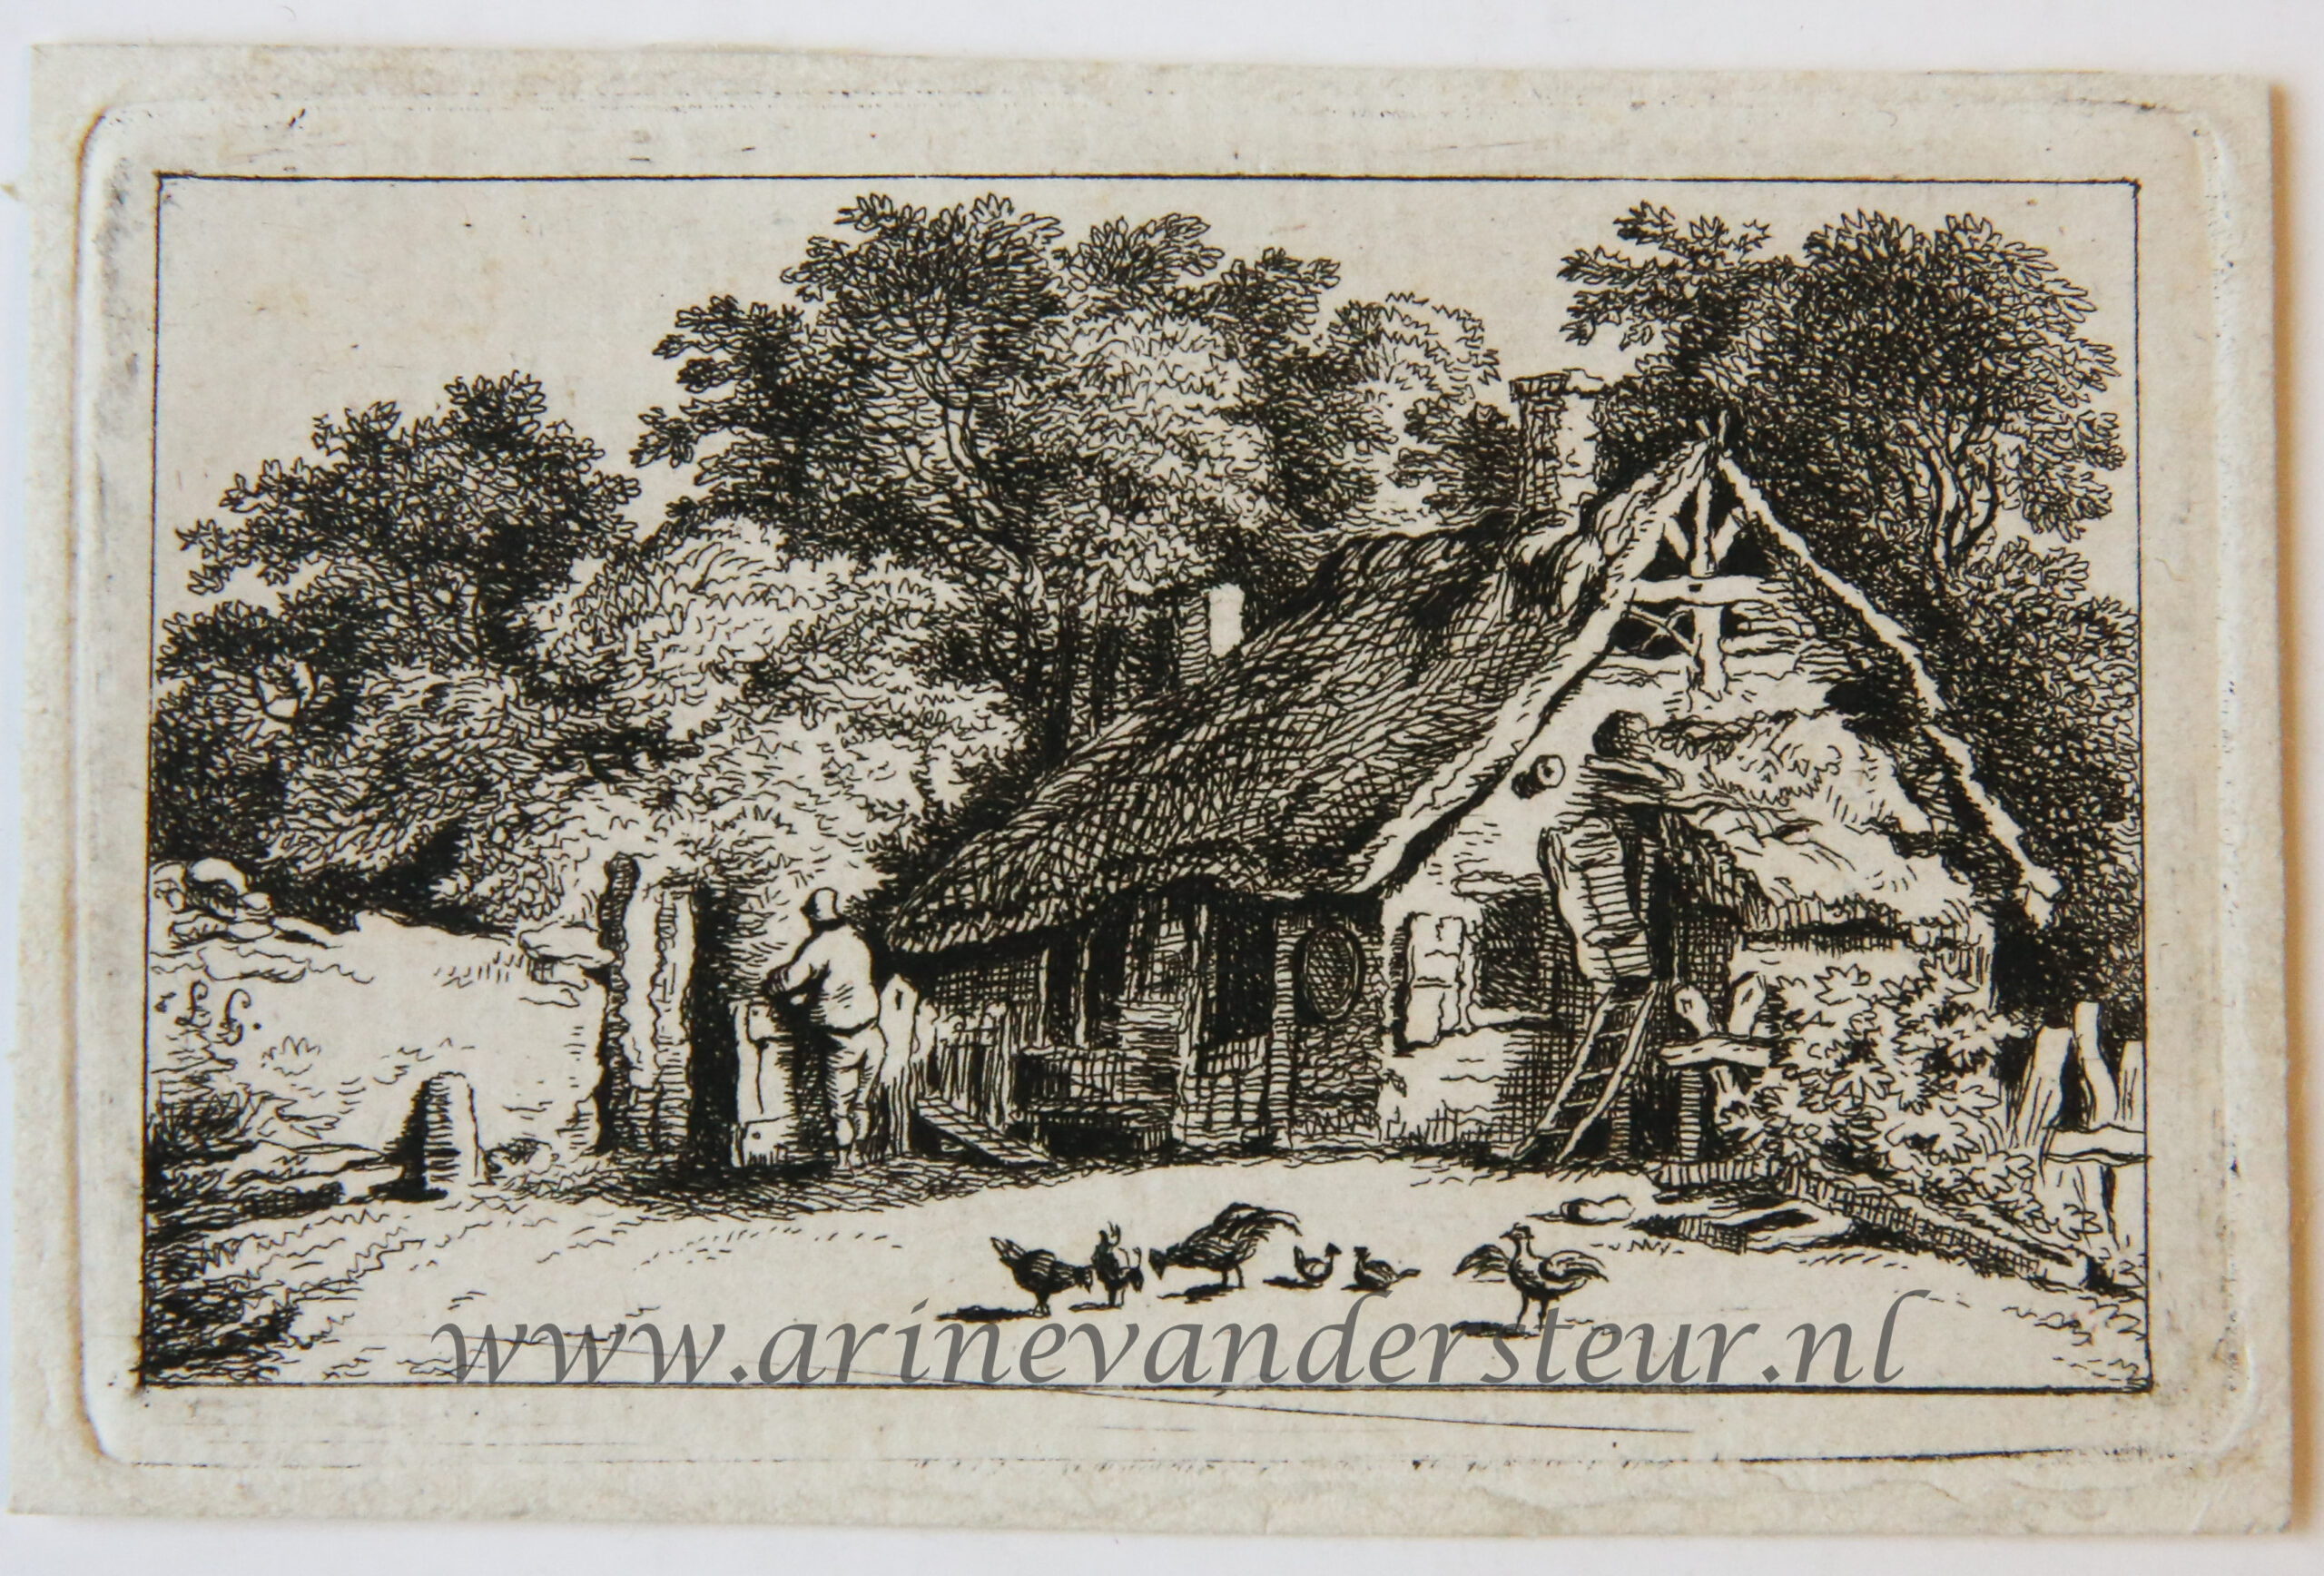 [Miniature antique print, etching] Salvator Legros, after H. Köbel, Barn and a yard, published ca. 1788.